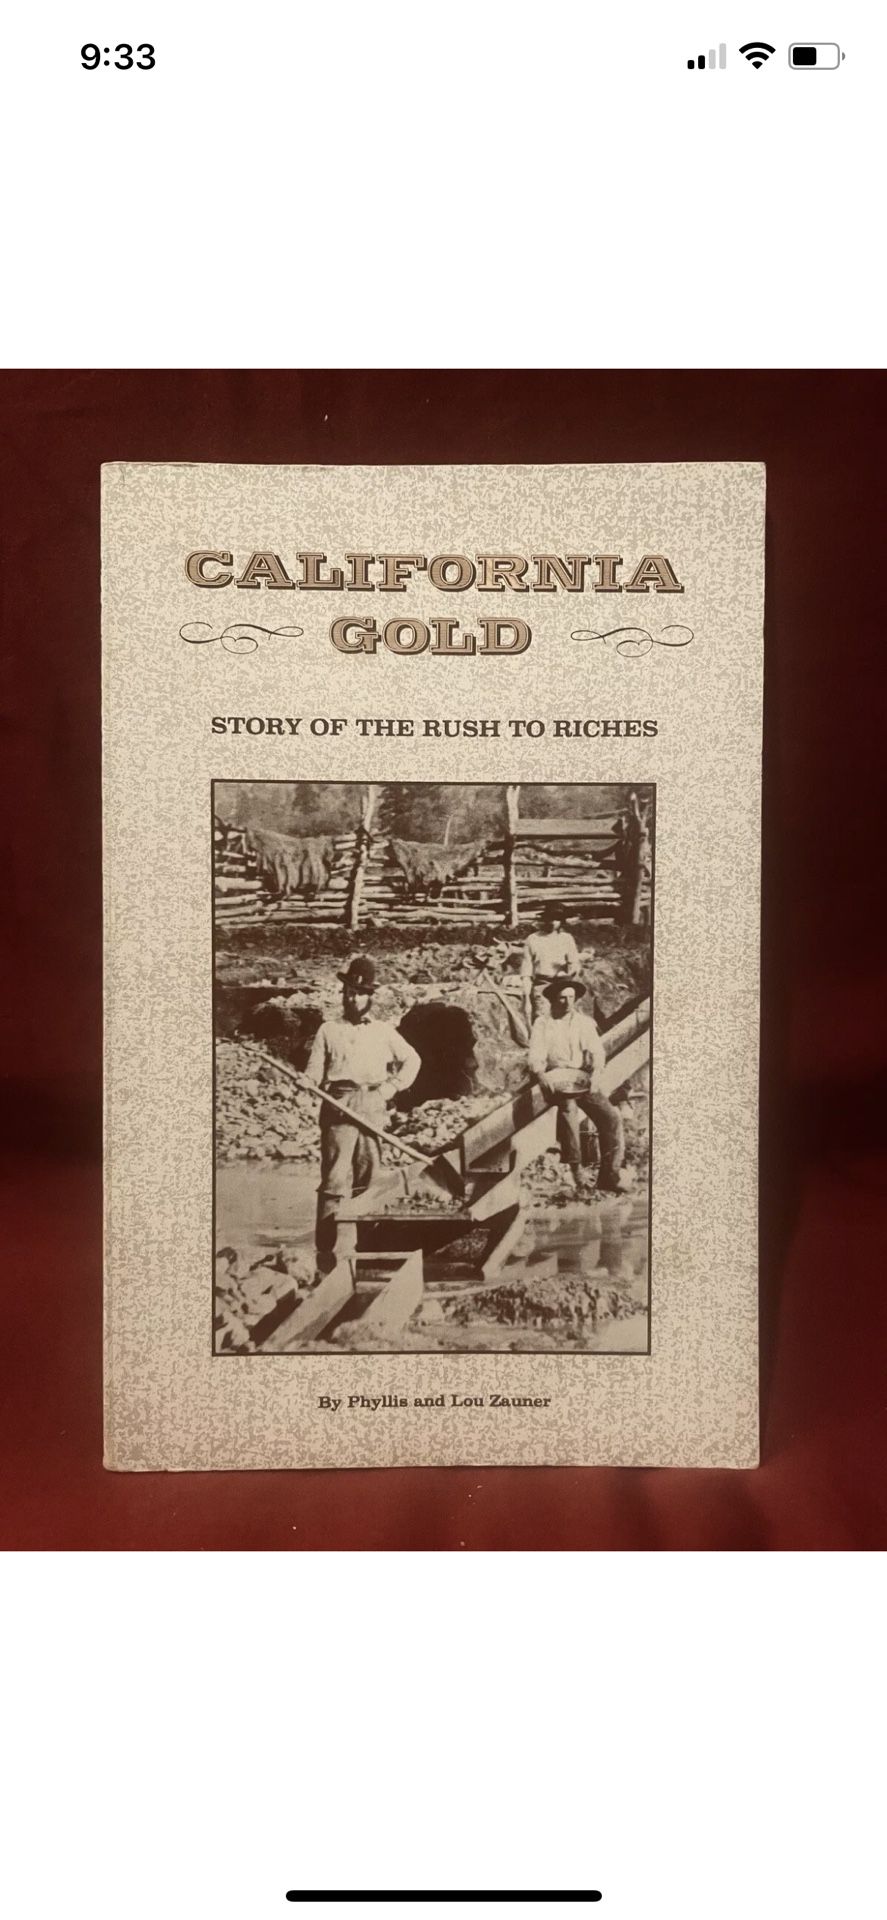 CALIFORNIA GOLD Story Of The Rush To Riches: Phyllis & Lou Zauner, 1980 1st Ed